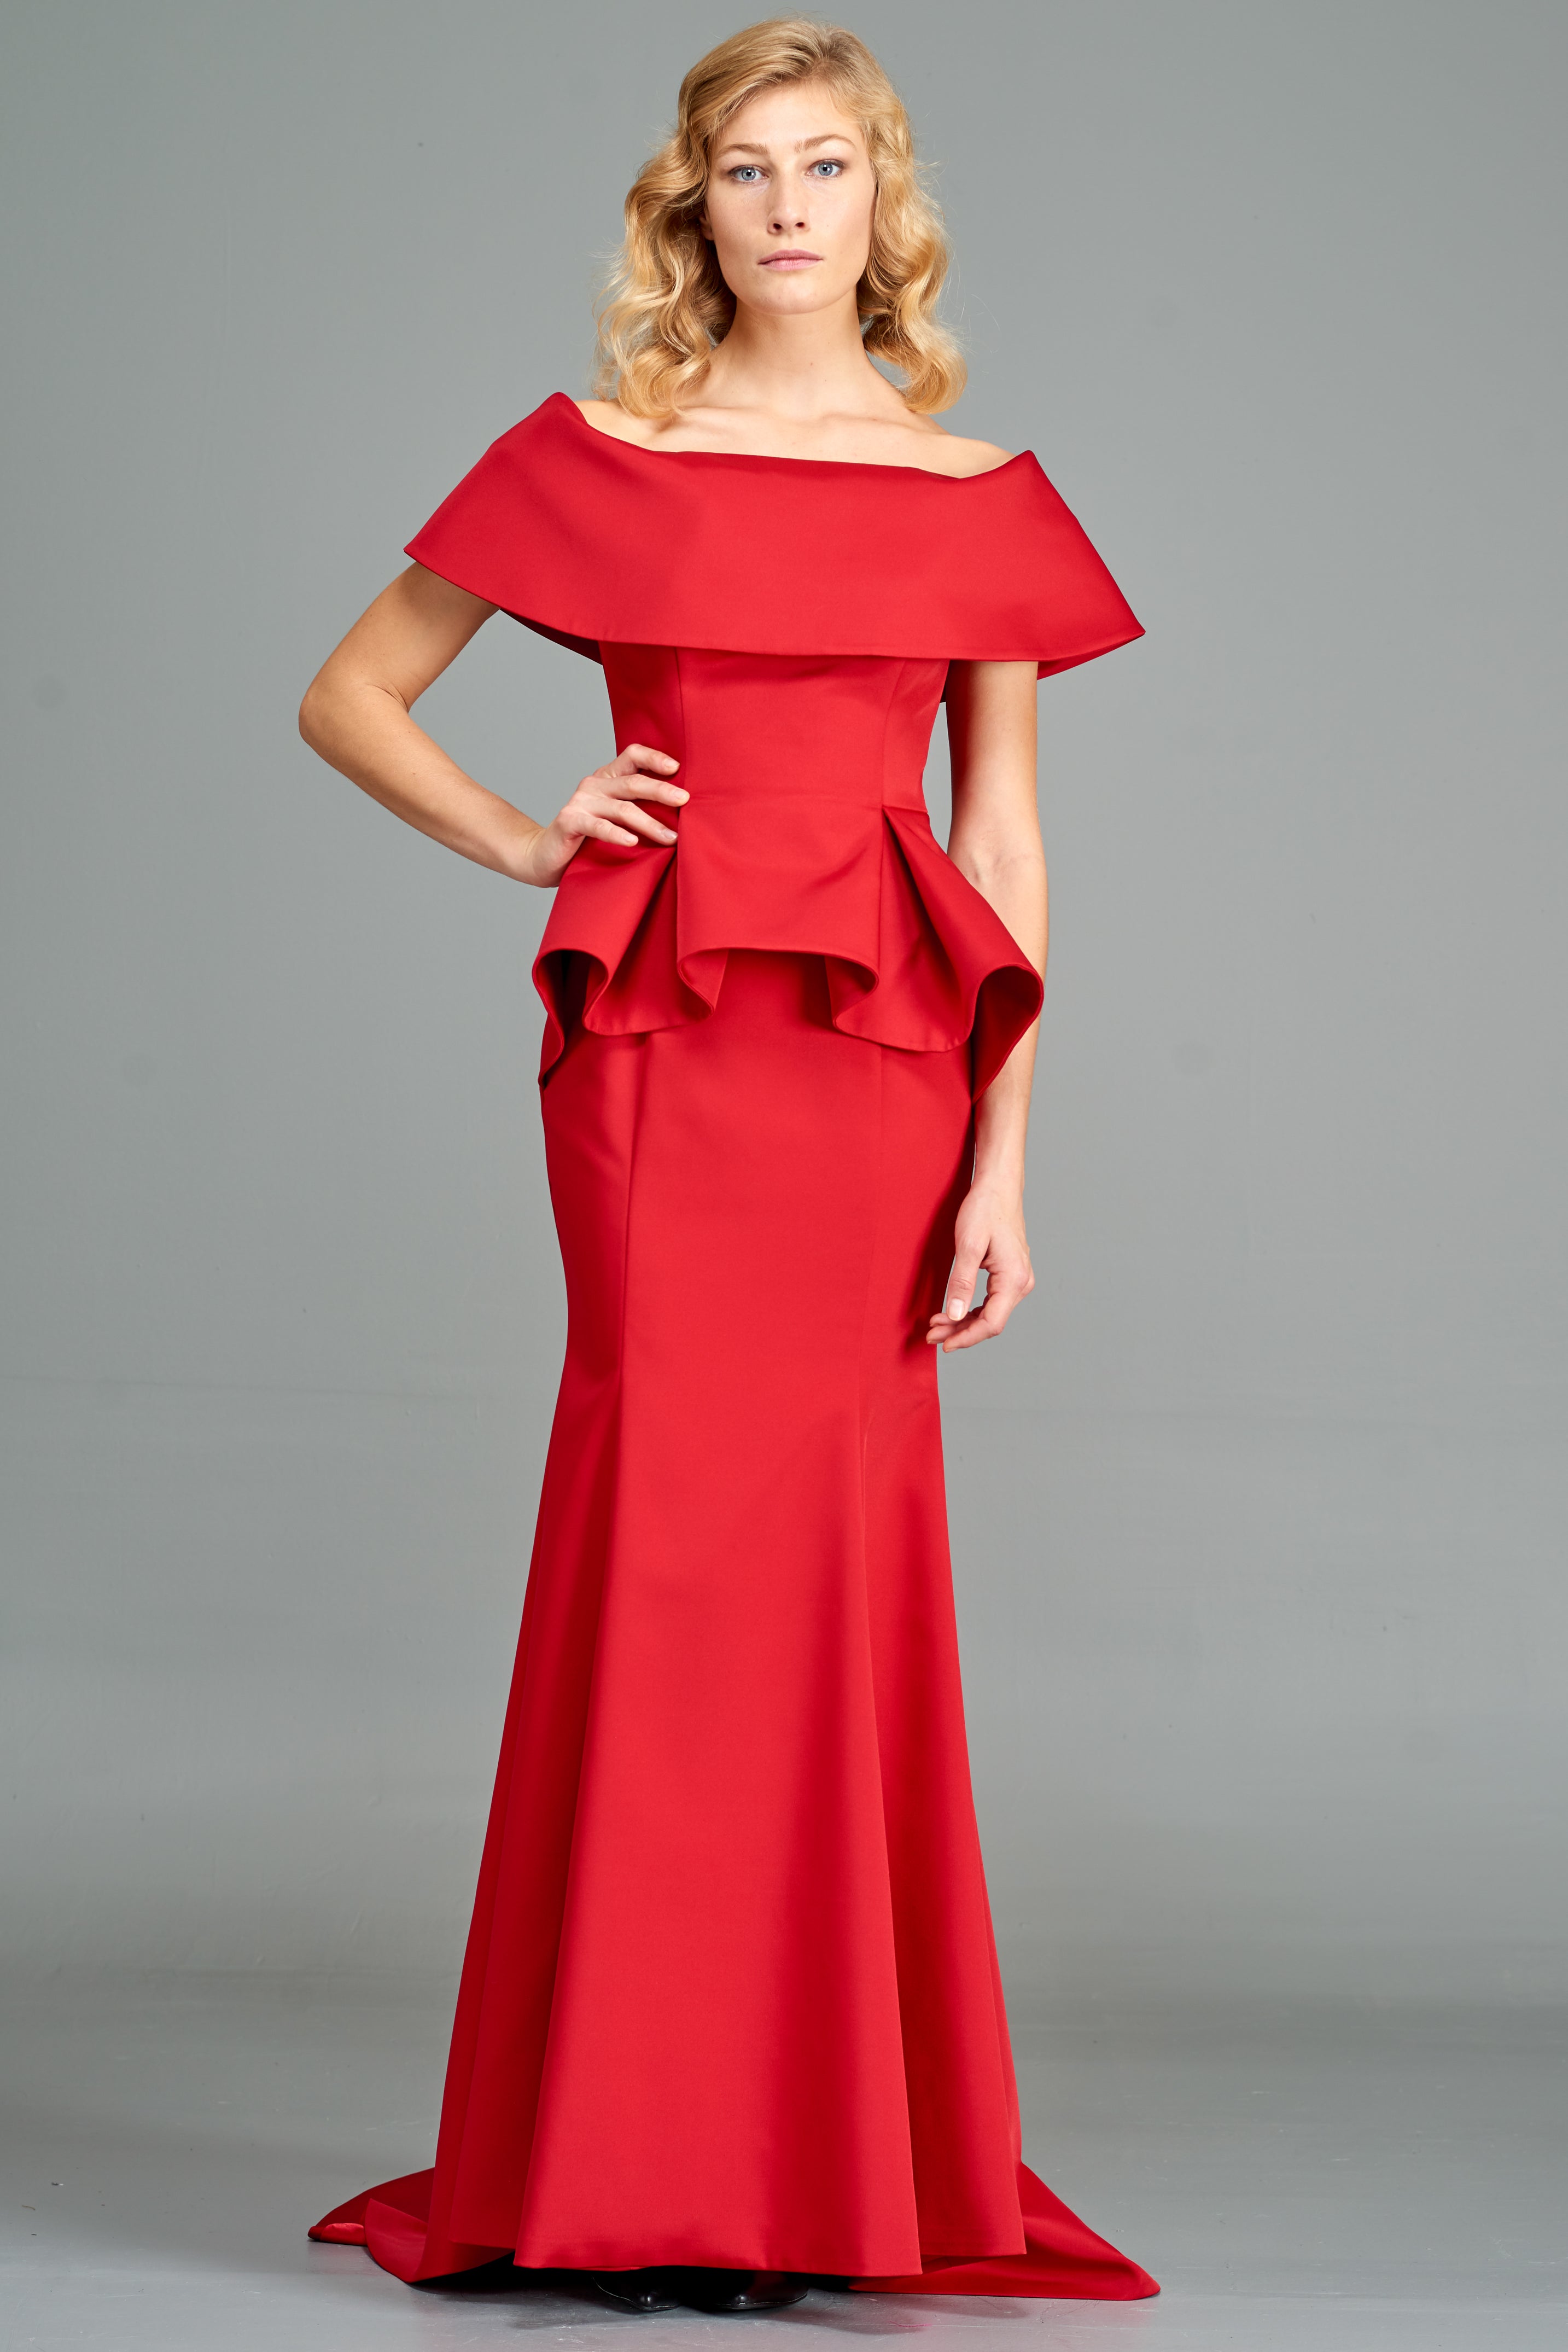 Structured Gown – John Paul Ataker